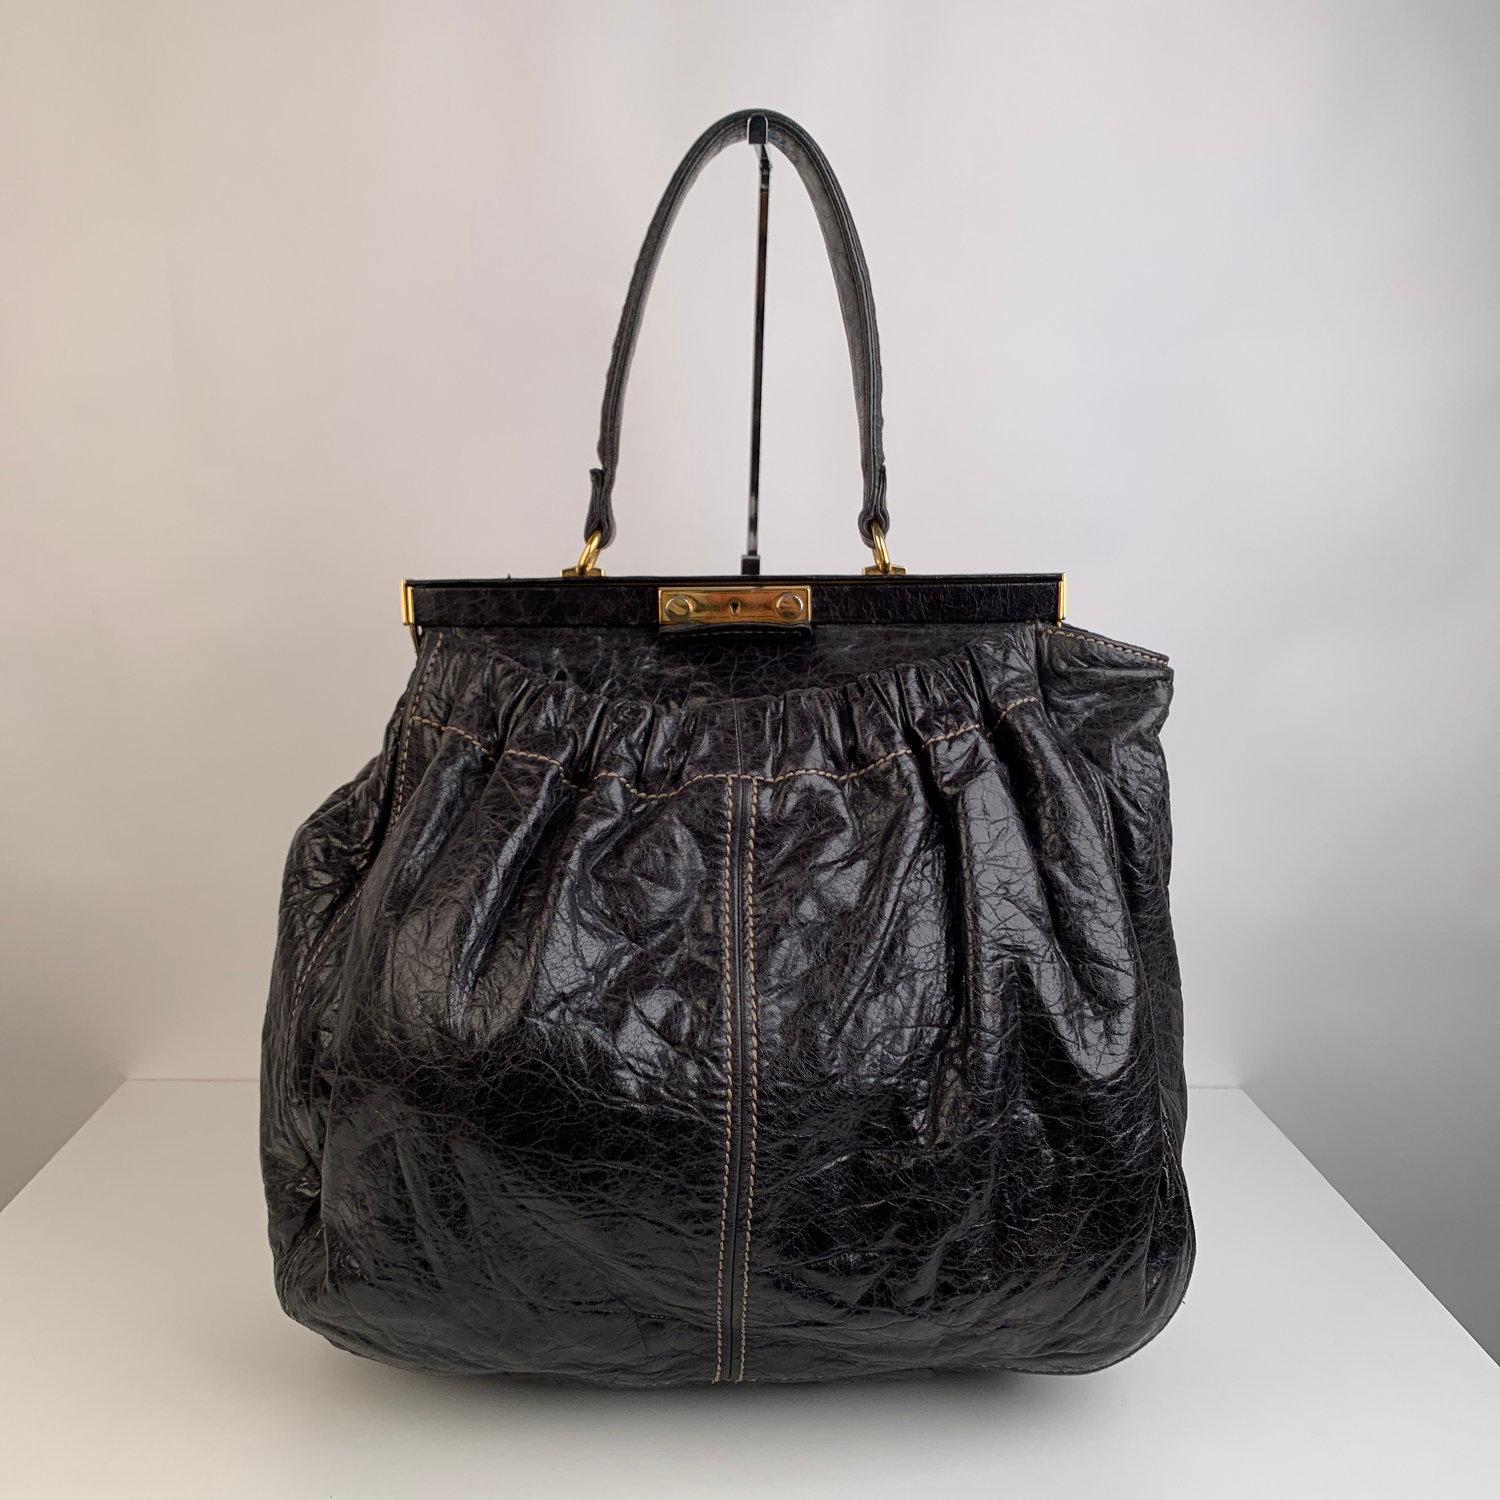 Black leather Miu Miu large tote bag with distressed finish. It features a framed top with key-lock closure (keys and key clochette are missing). Gold-tone hardware and top carry handle. 2 large open pockets on the exterior (one on the front and one